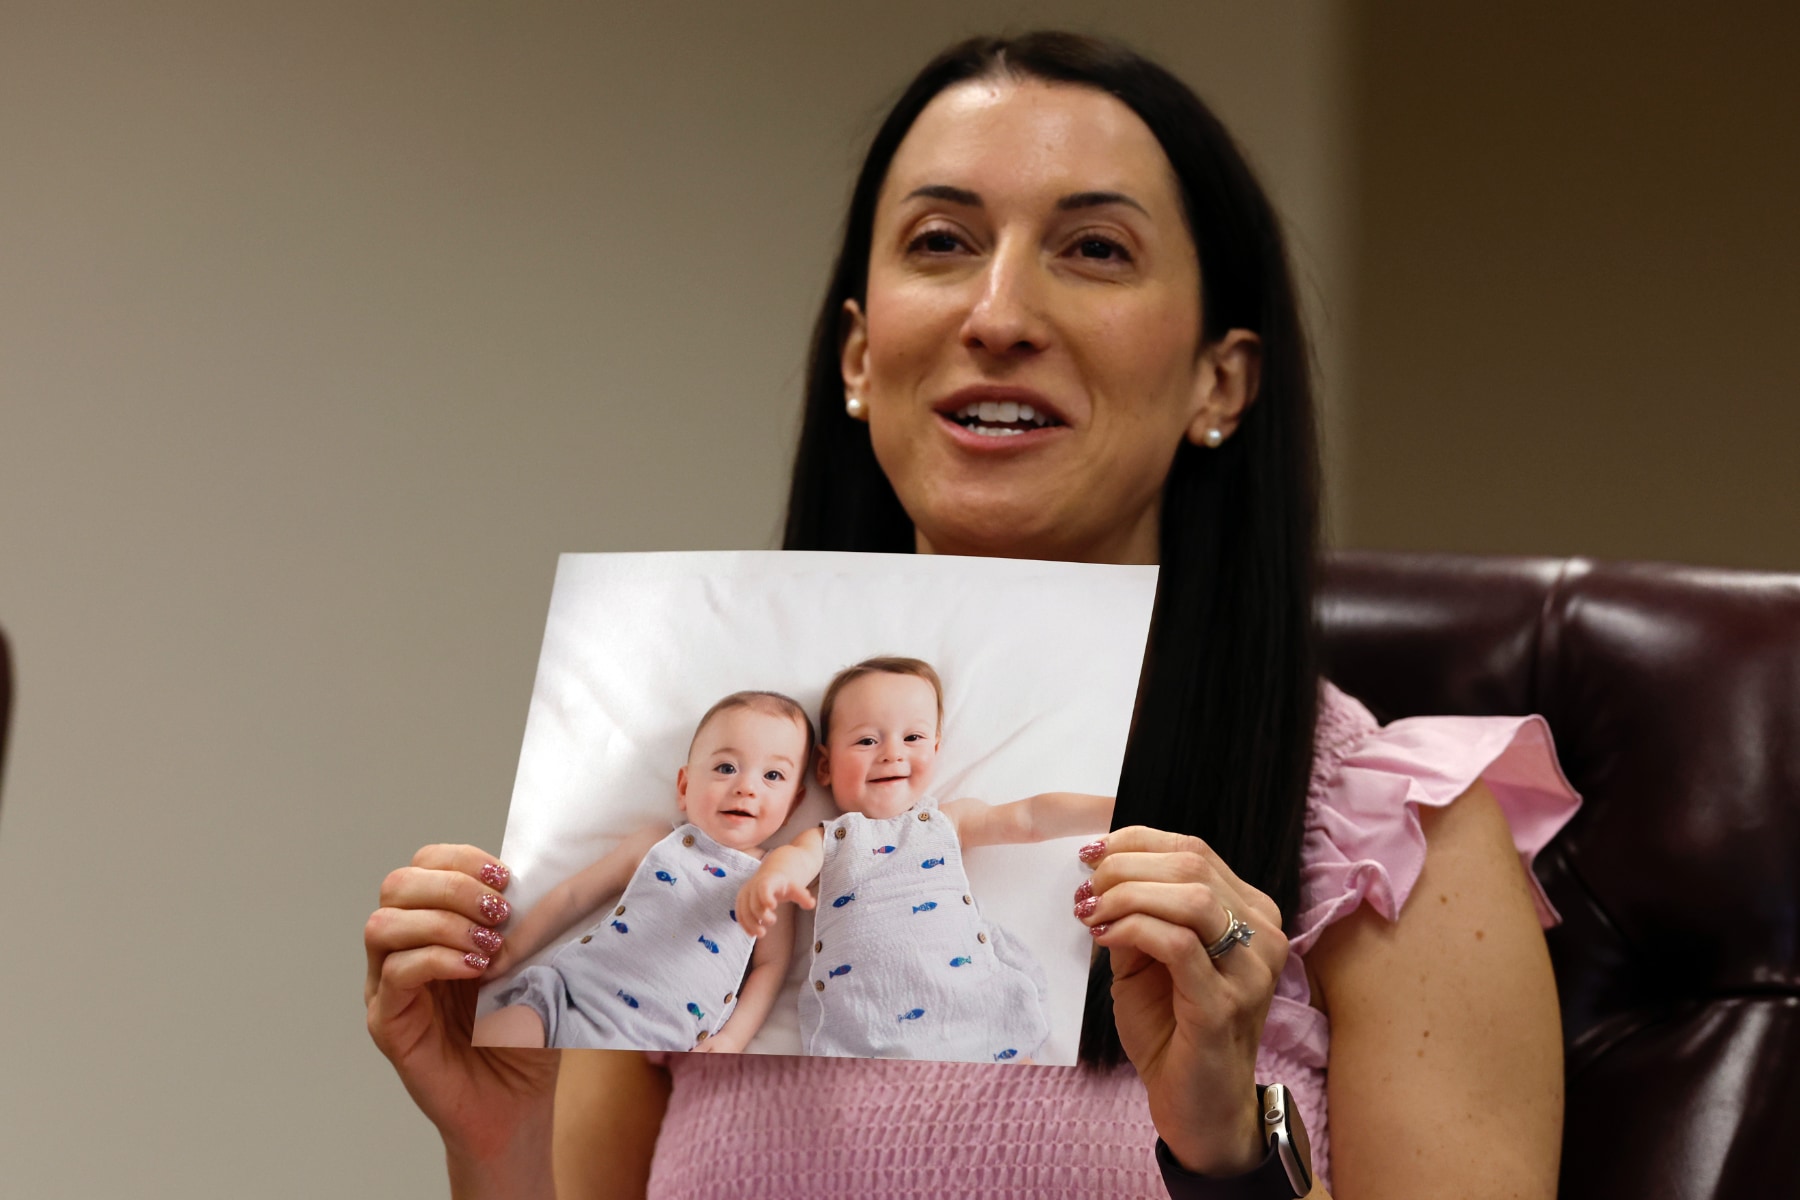 Julie Cohen shows off a photo of her twins, Gideon and Levi